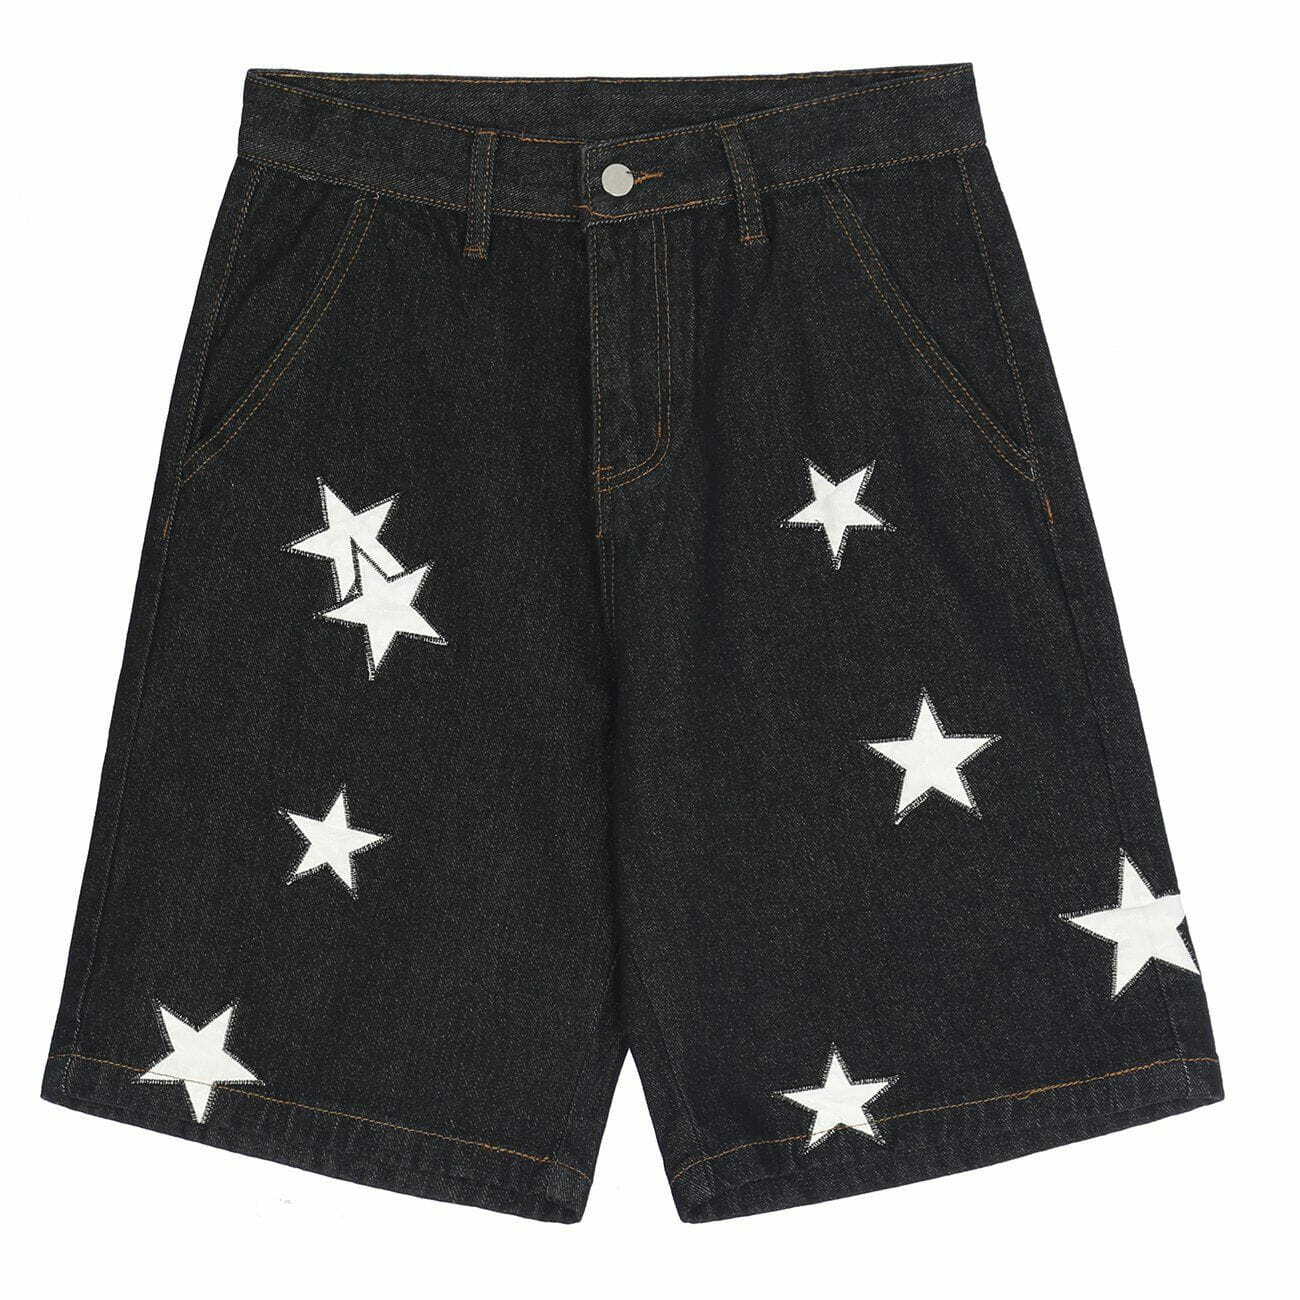 starry embroidered denim shorts retro chic urban fit 3124